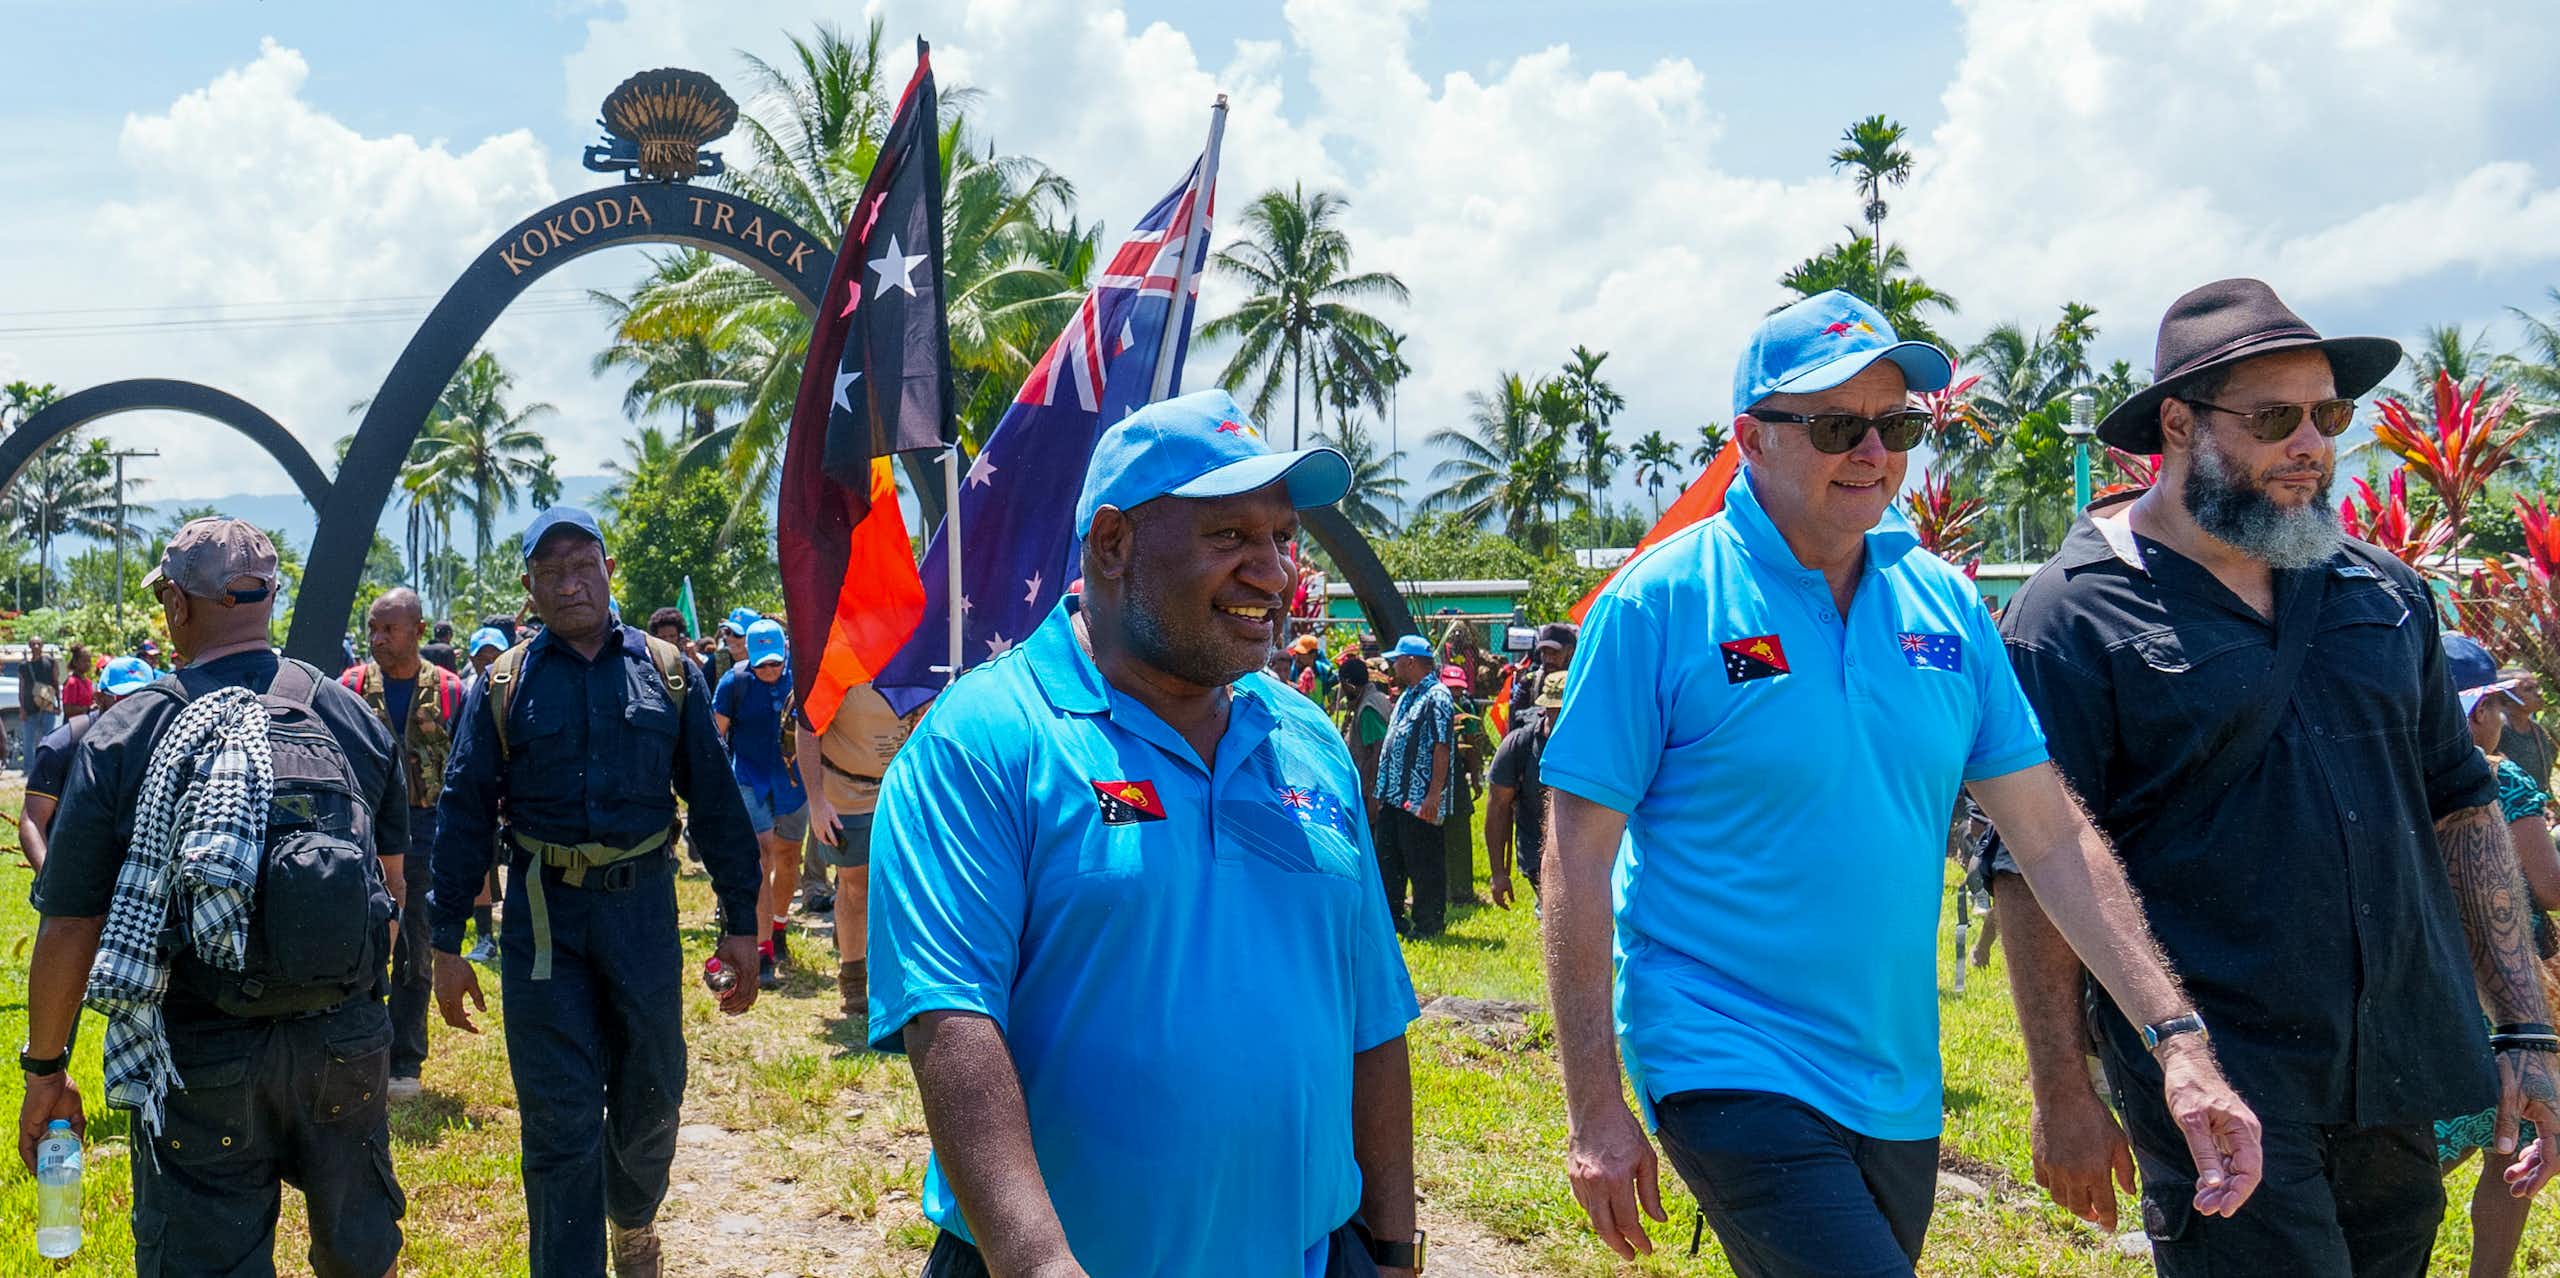 China’s money only goes so far – Kokoda shows why history binds PNG and Australia in a far deeper way